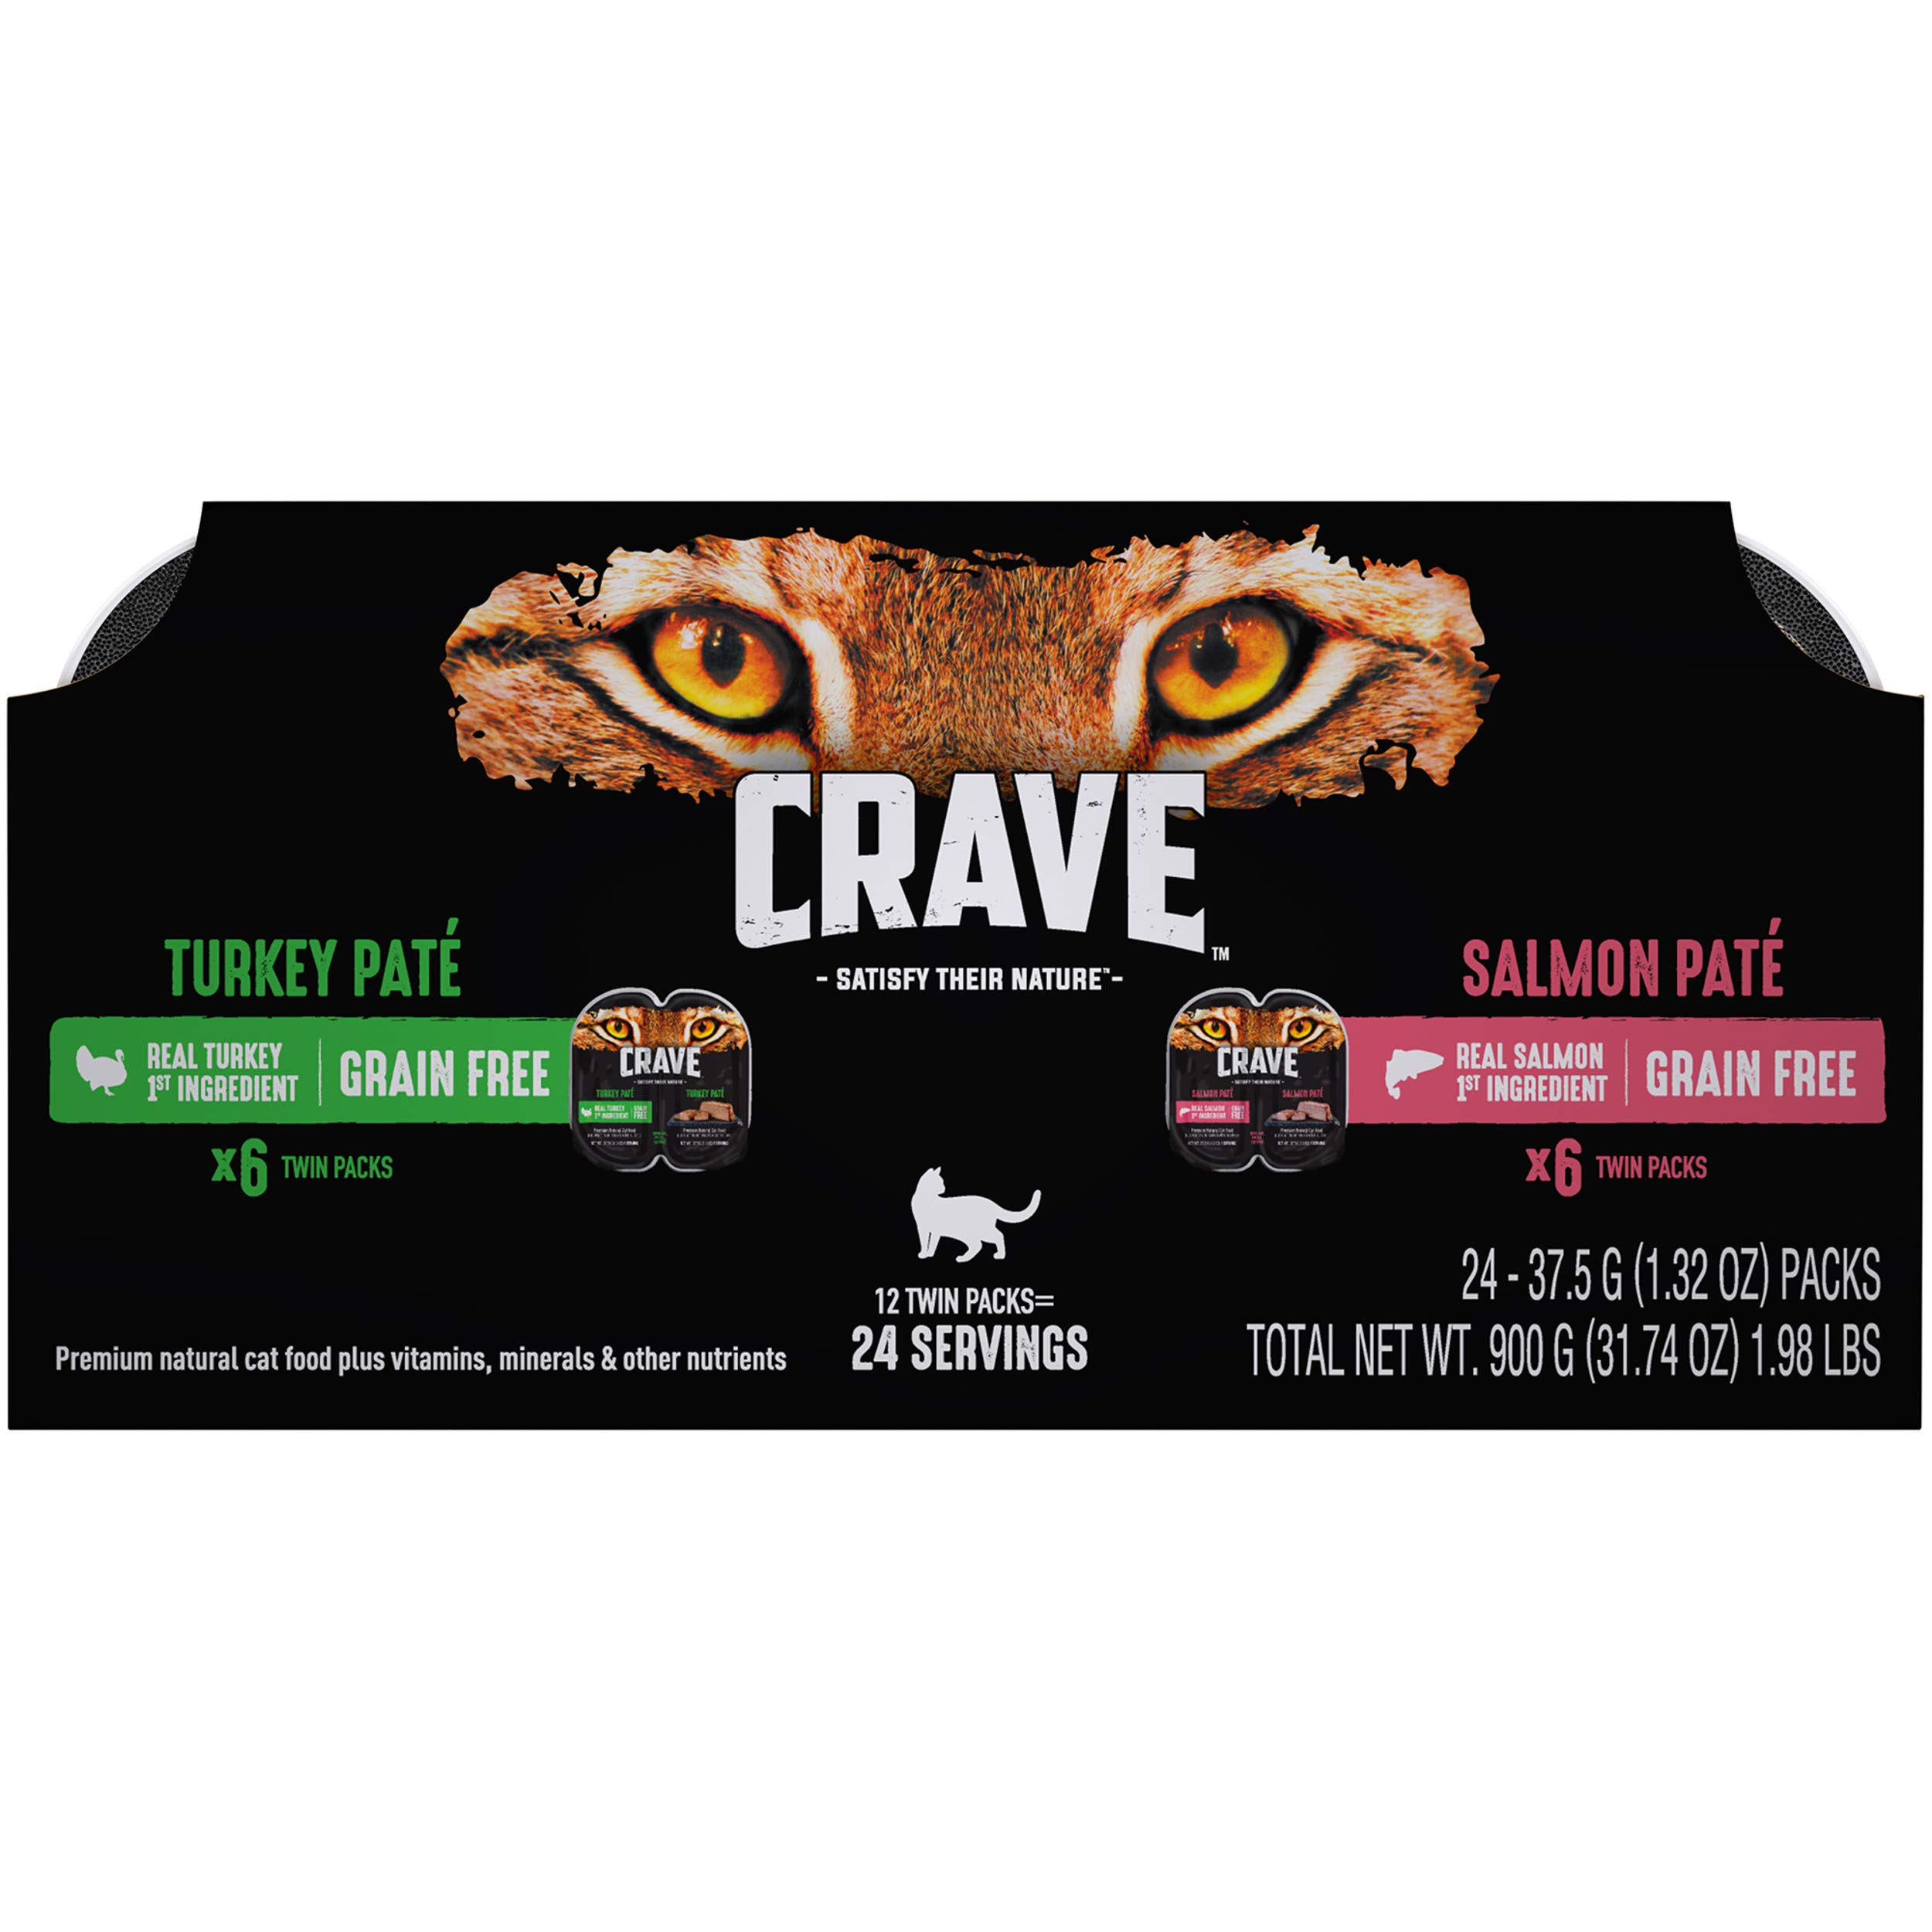 What Happened to Crave Wet Cat Food?